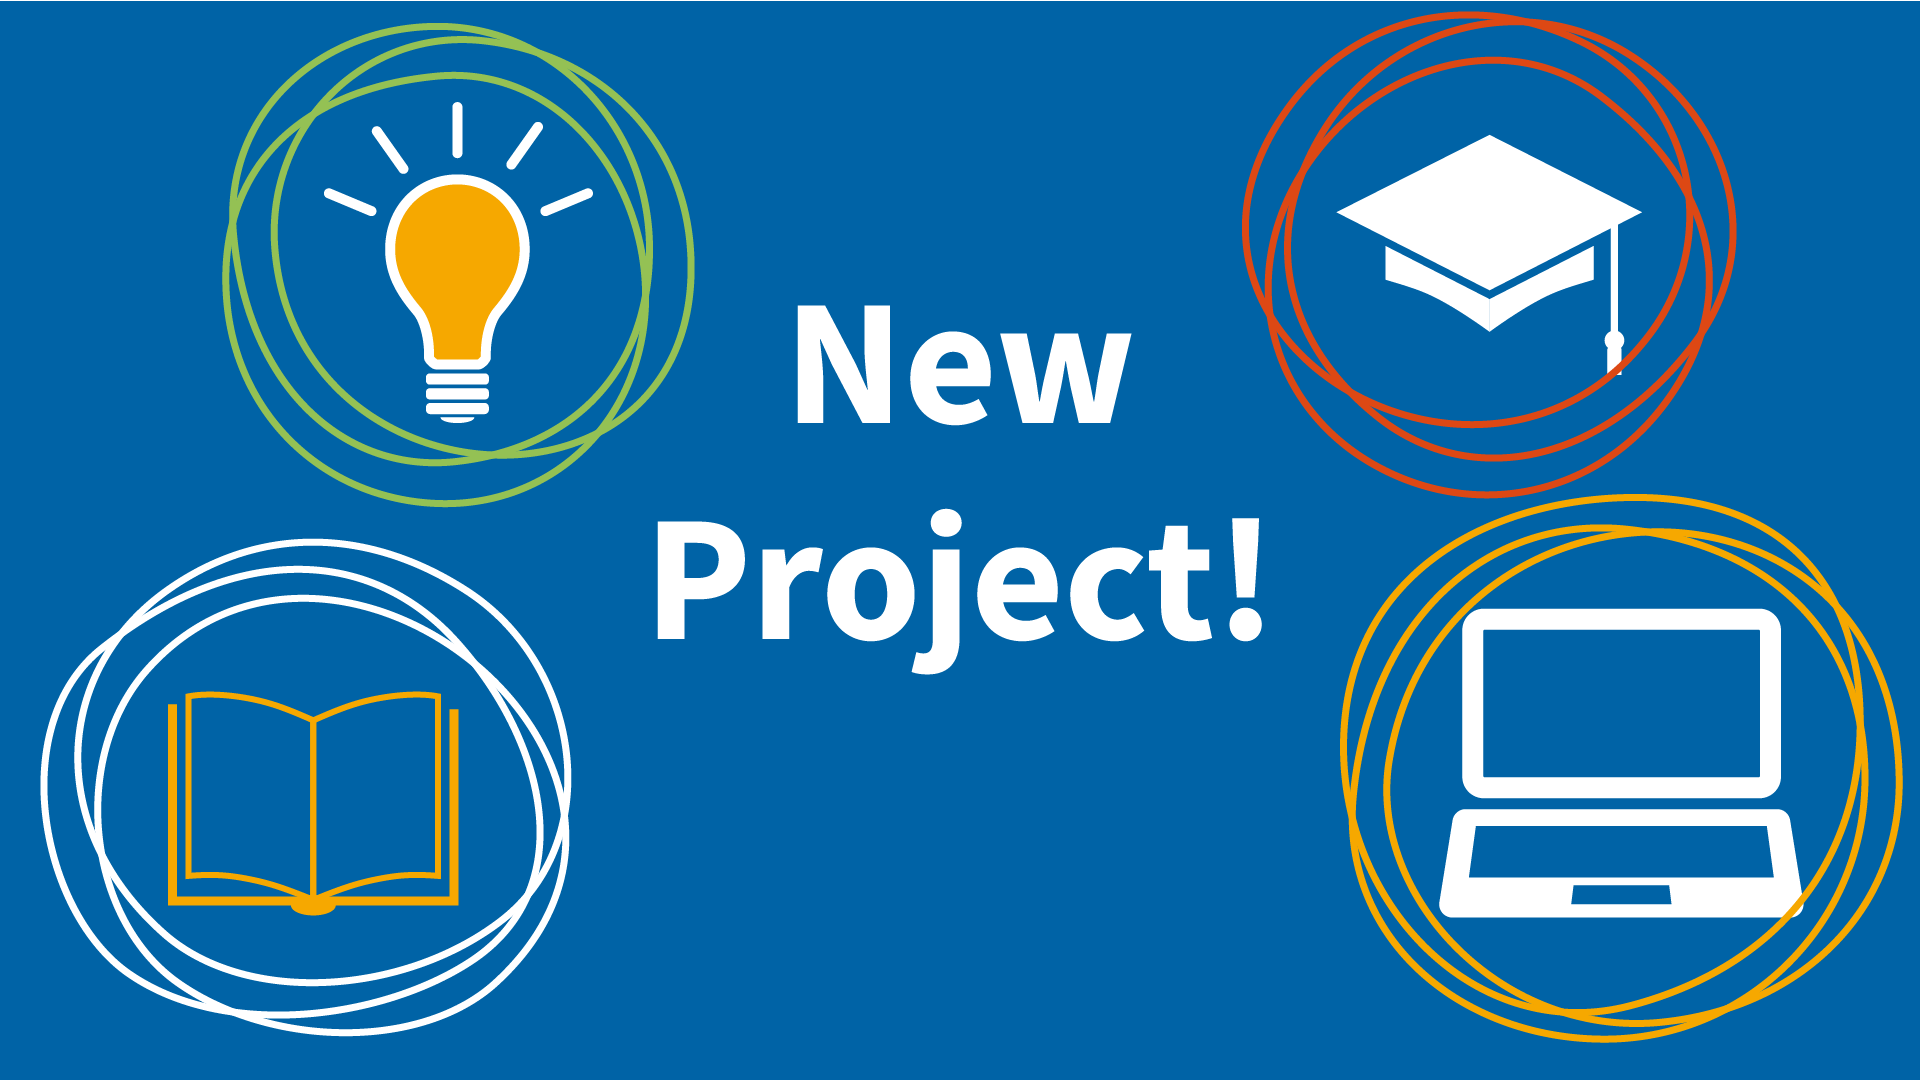 drawings of a lightbulb, a graduation cap, a book and an open laptop in white, yellow, red and green surrounding the words "New Project!" on a blue background